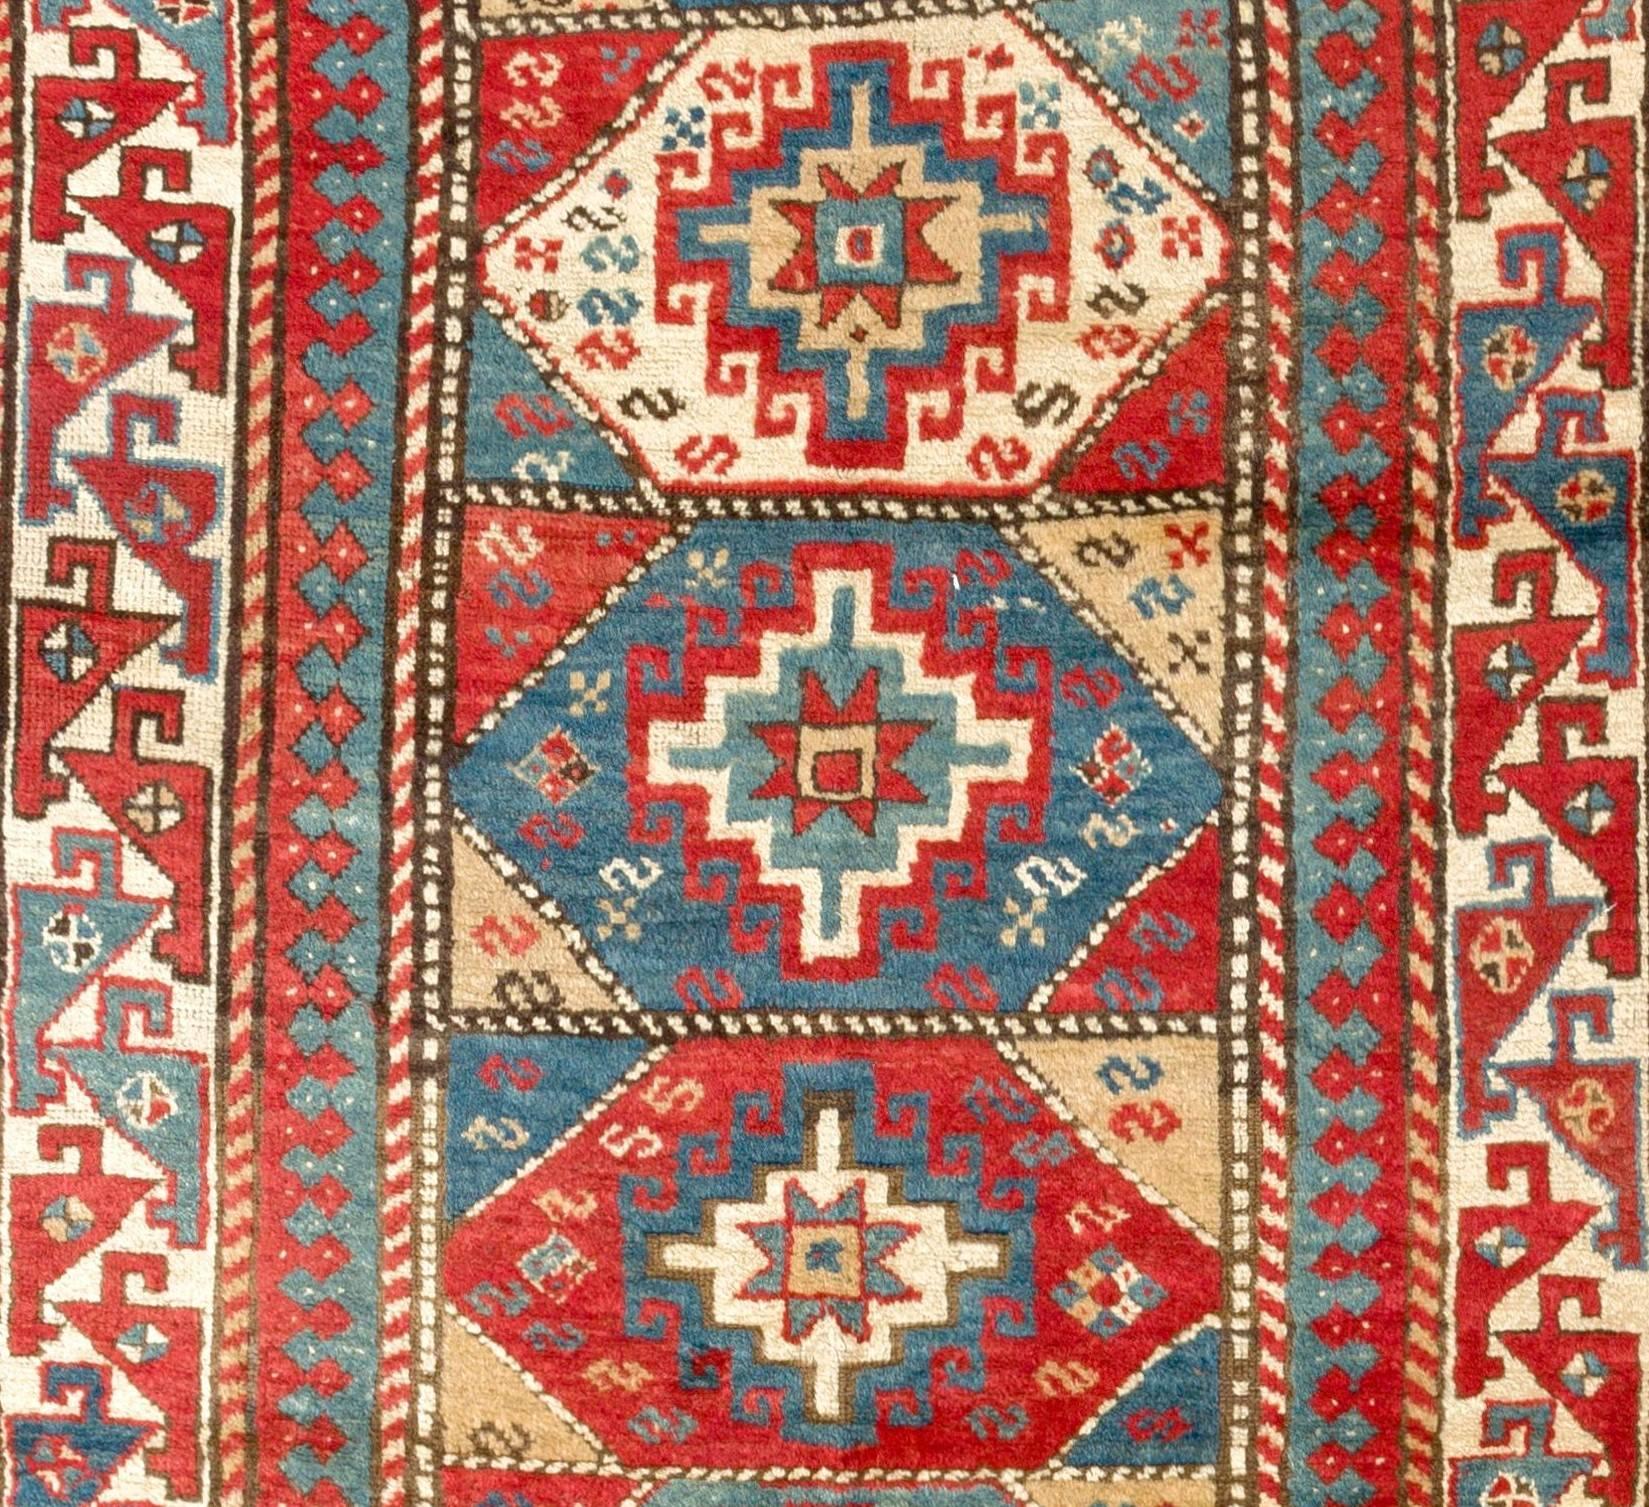 A colorful Caucasian Kazak rug made of natural dyed lambs wool pile on wool foundation, circa 1870.
Good condition and even medium pile.